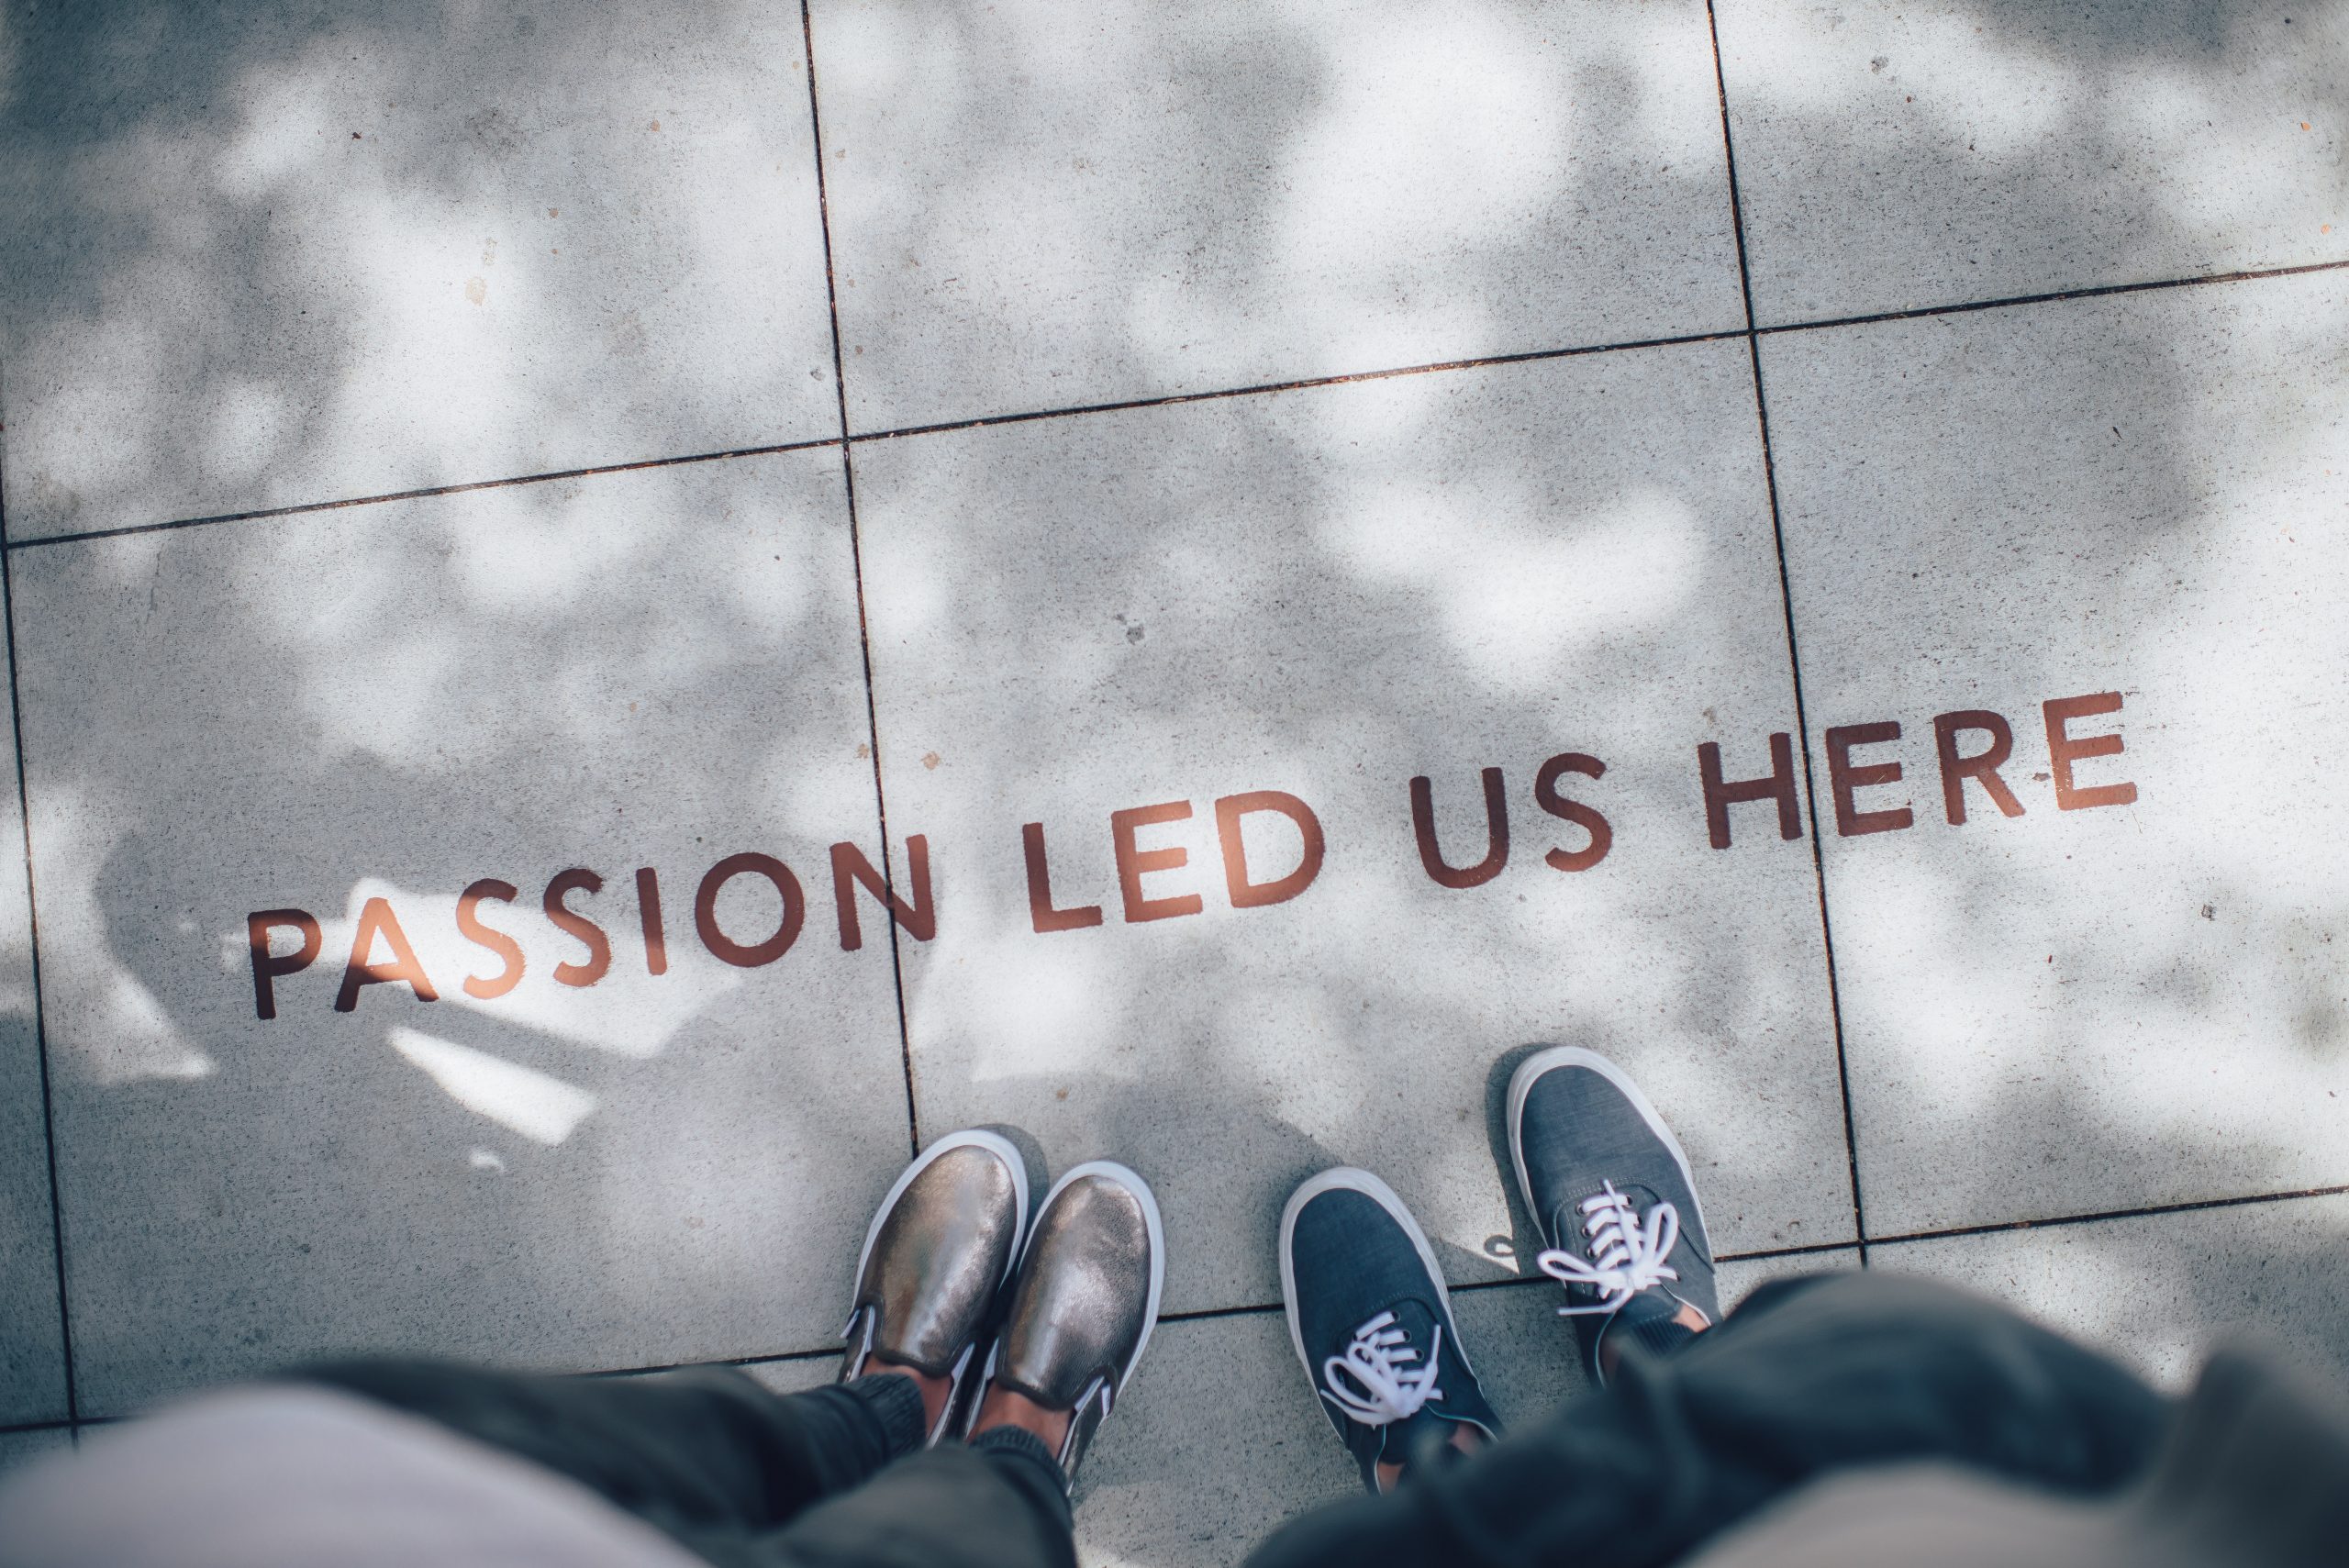 A photo looking down at two people standing over a quote painted on the sidewalk that reads "Passion Led Us Here"